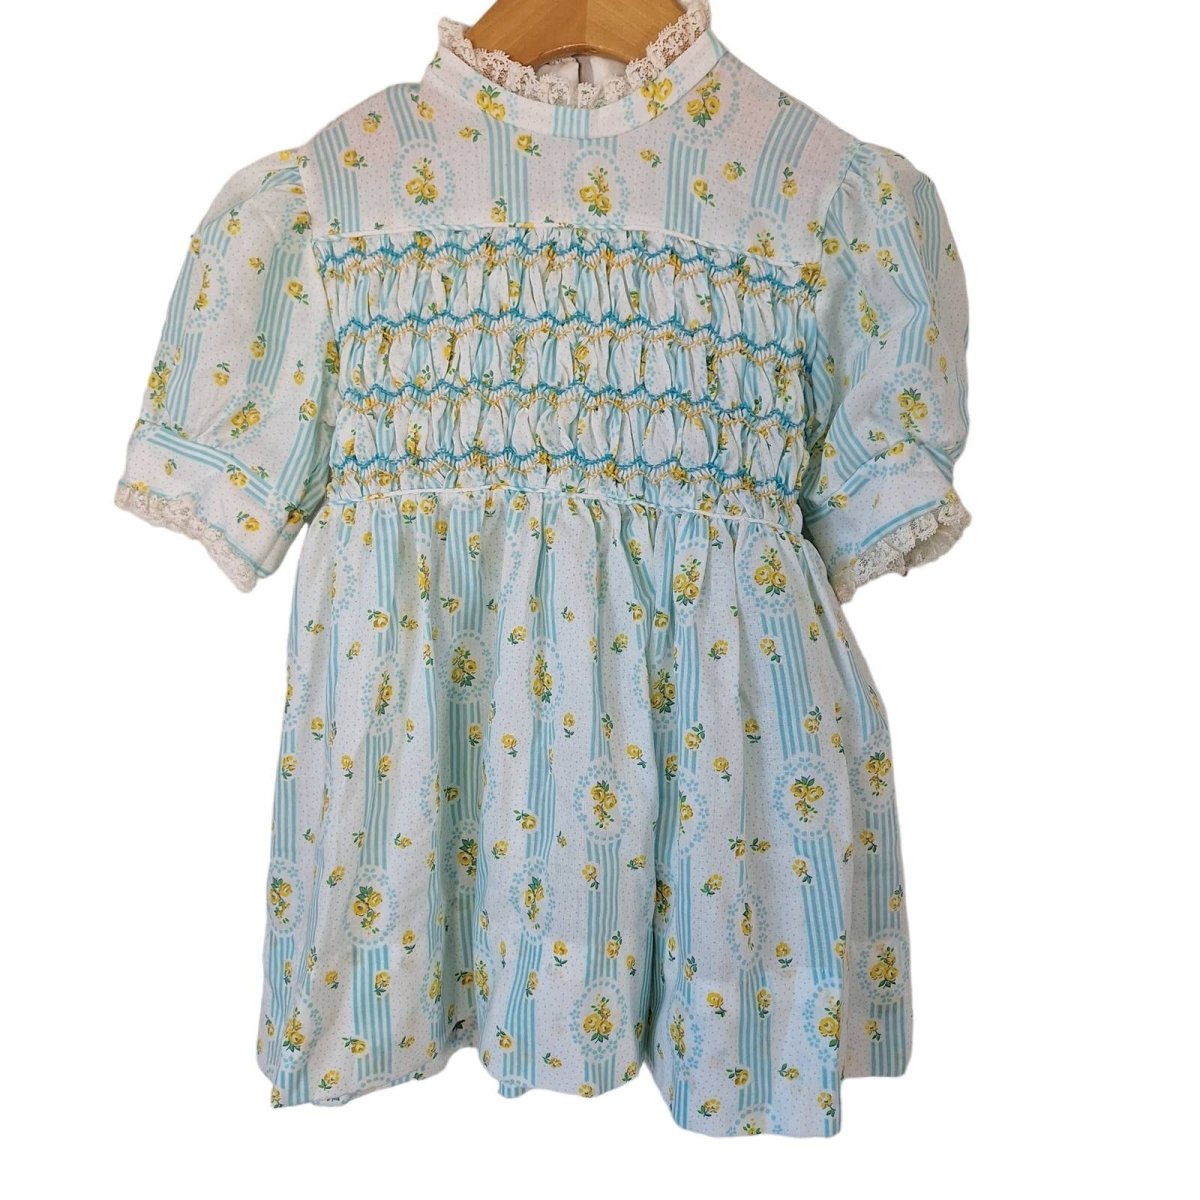 Vintage 70s Kids Polly Flinders Smocked Dress Girls Size 4 - themallvintage The Mall Vintage